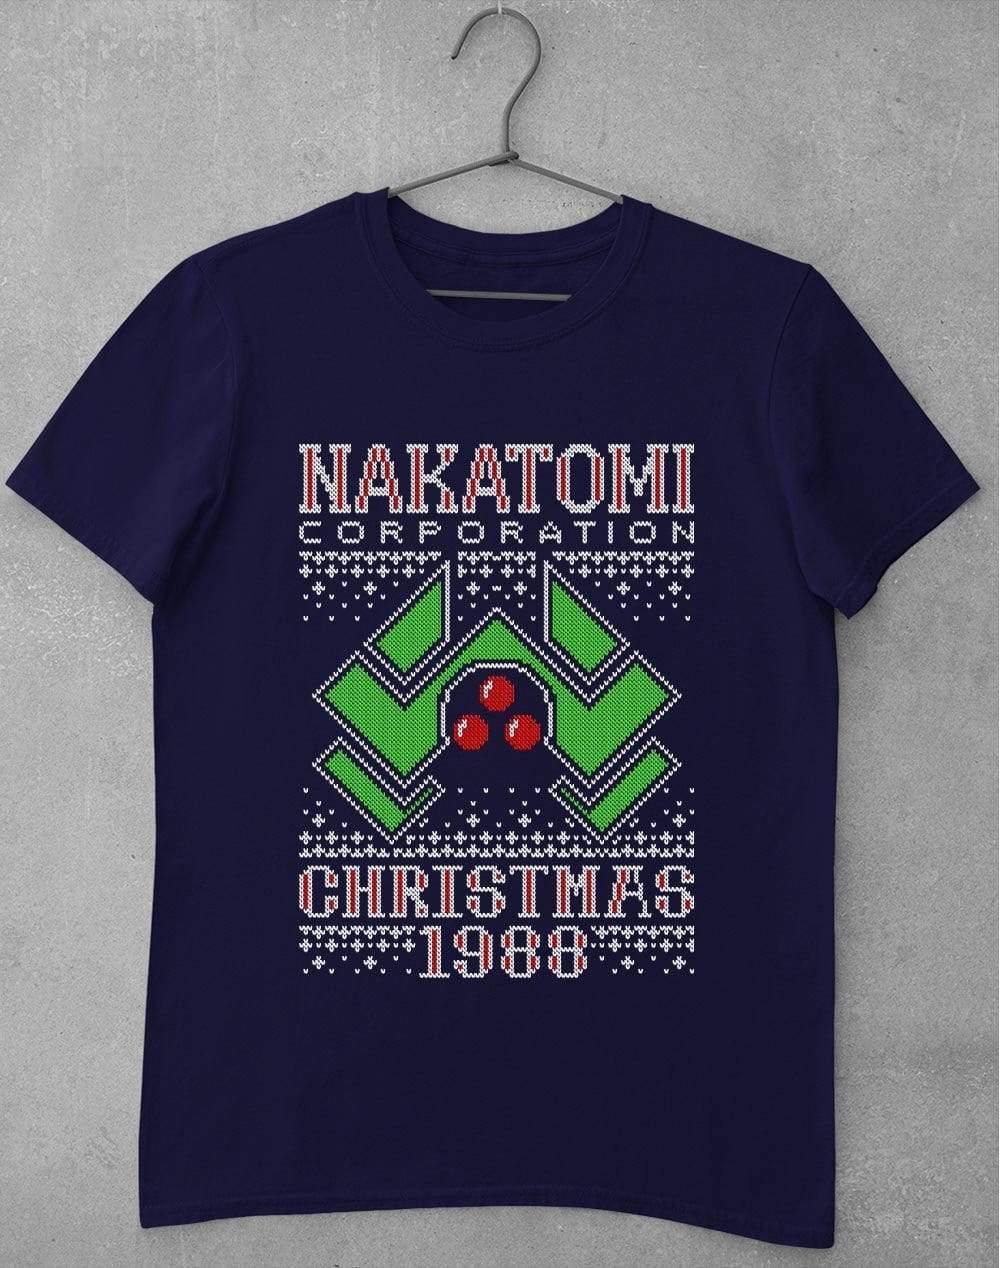 Nakatomi Christmas 1988 Knitted-Look T-Shirt S / Navy  - Off World Tees